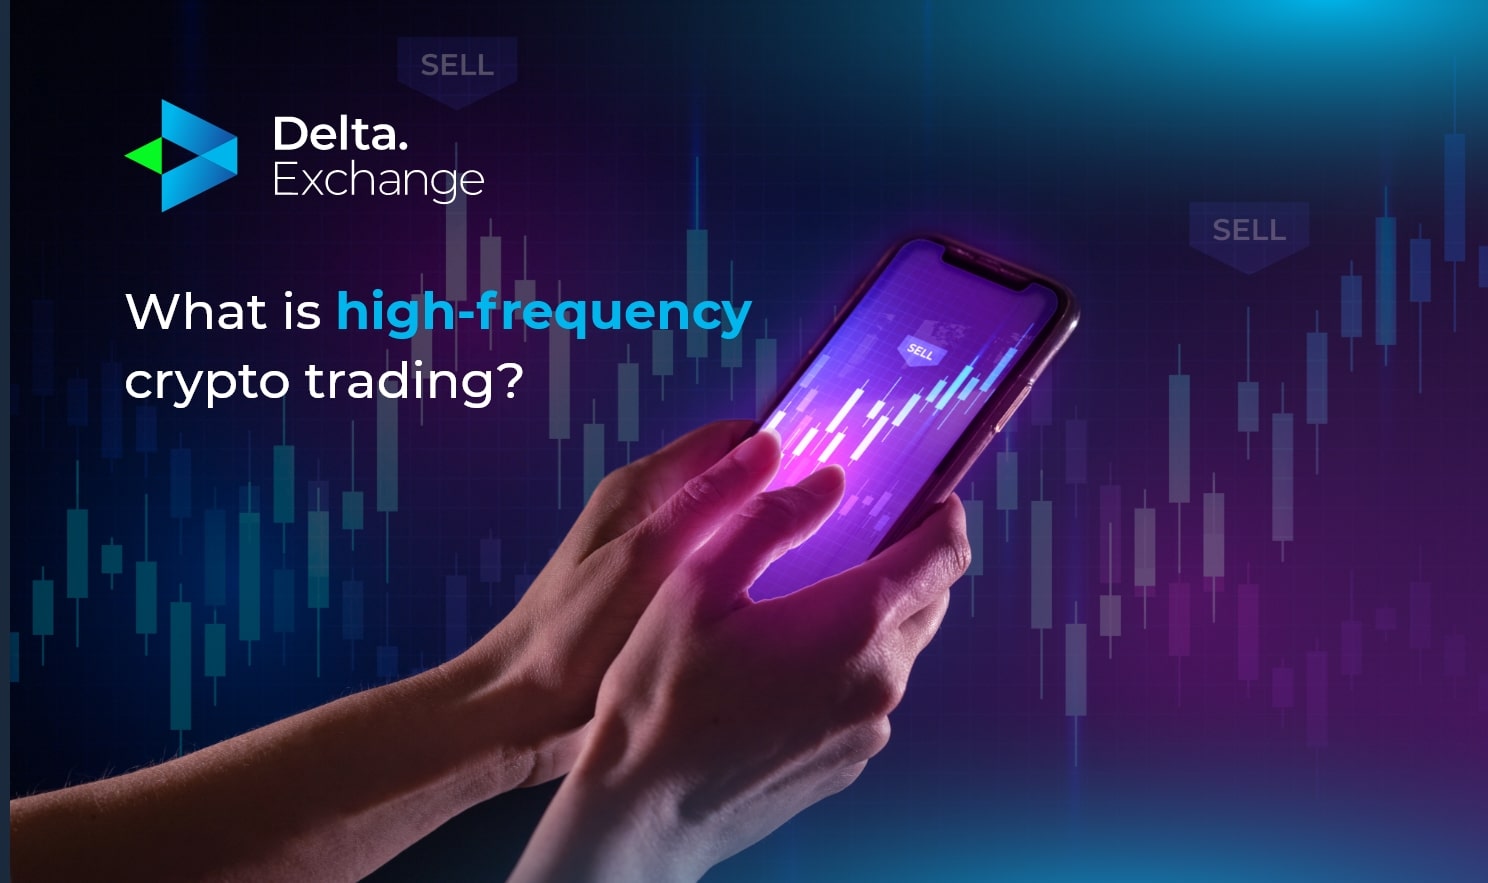 What is high-frequency crypto trading?